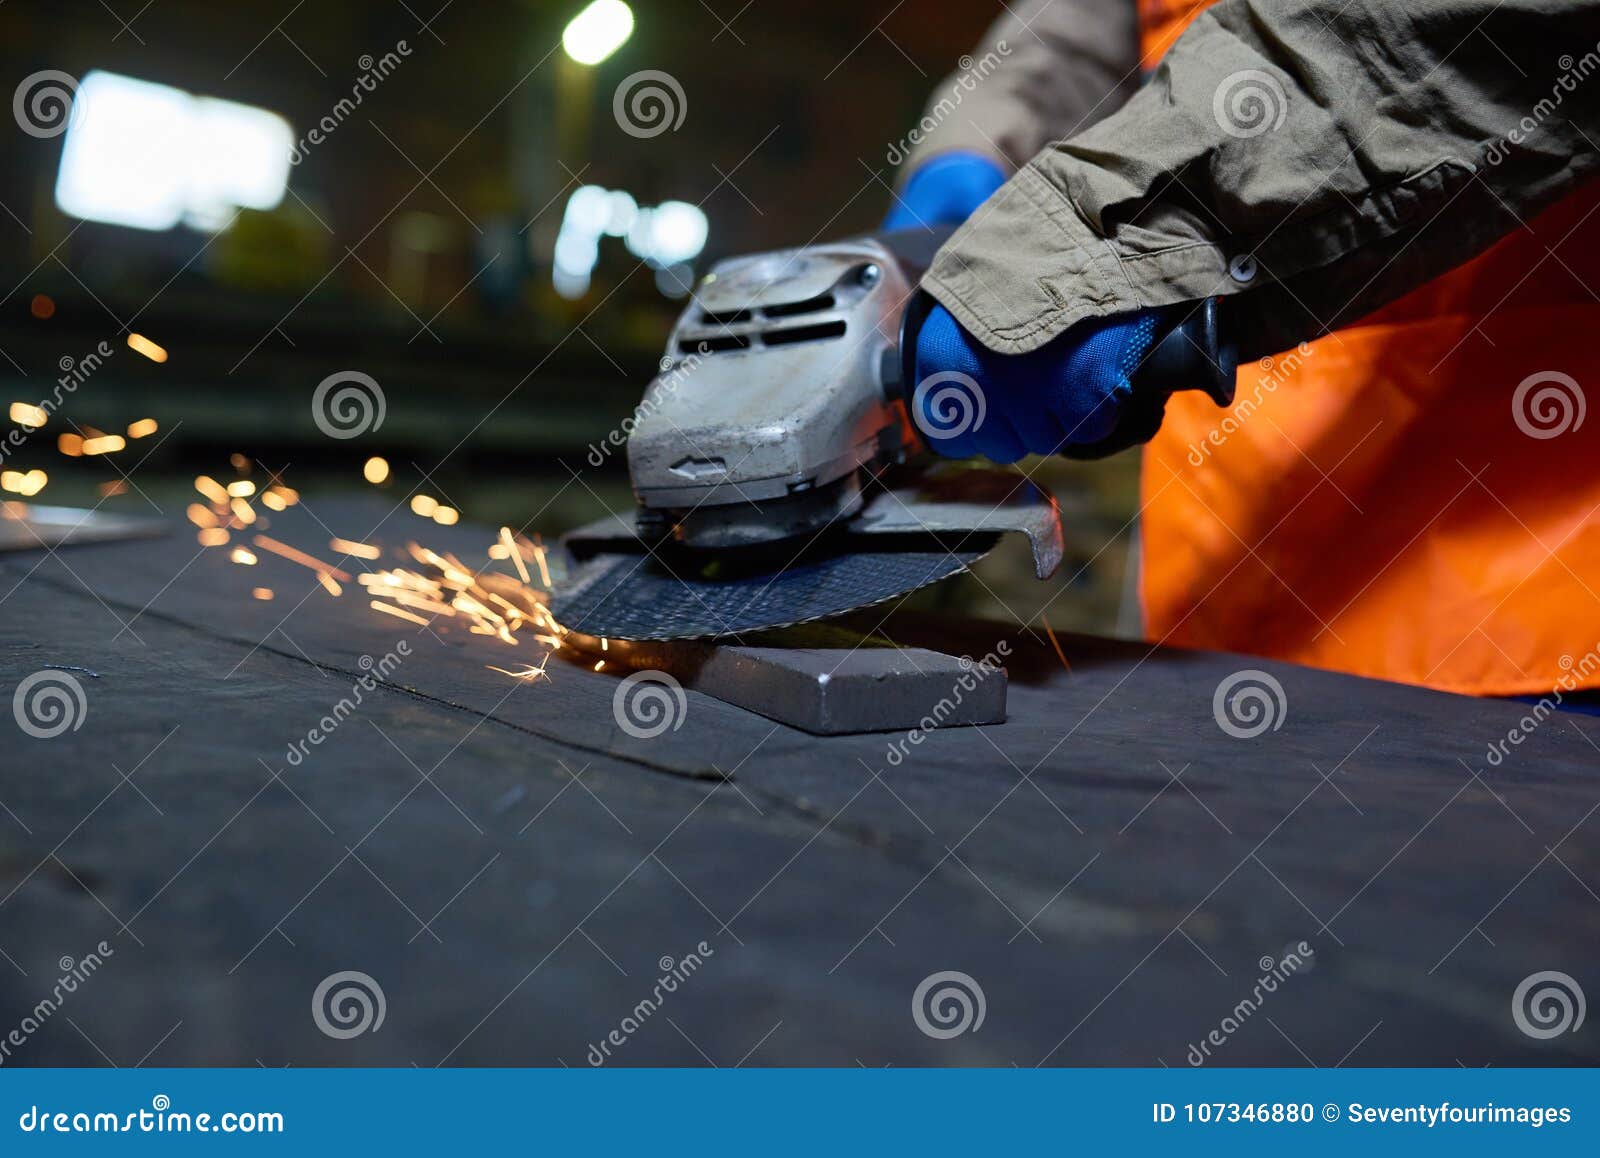 steel plant worker using angle grinder